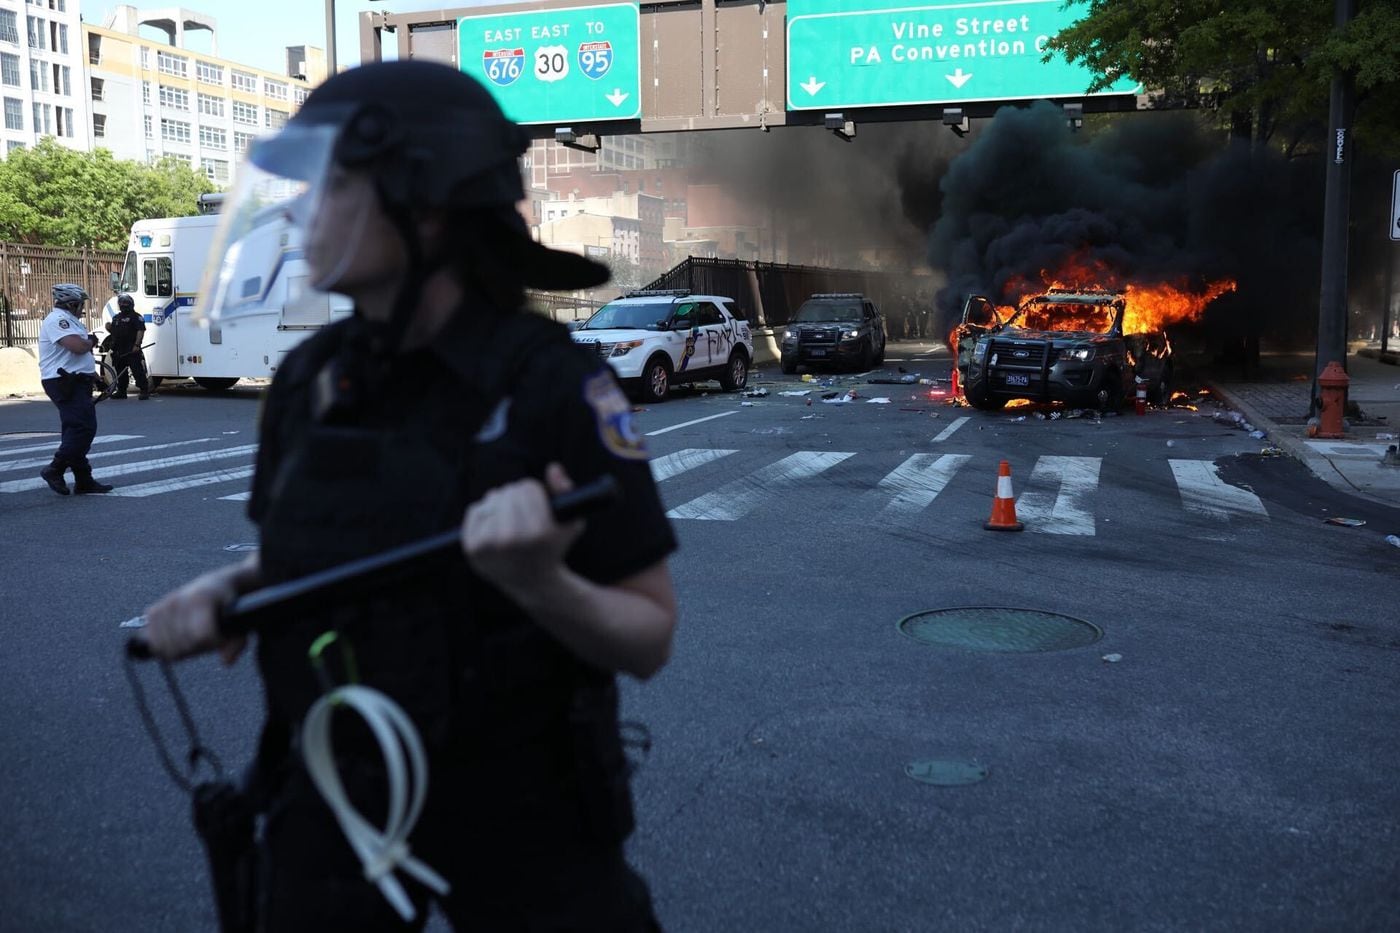 Philadelphia police push back protesters from a burning squad car before it blows up near the intersection of Broad and Vine Streets on May, 30, 2020.